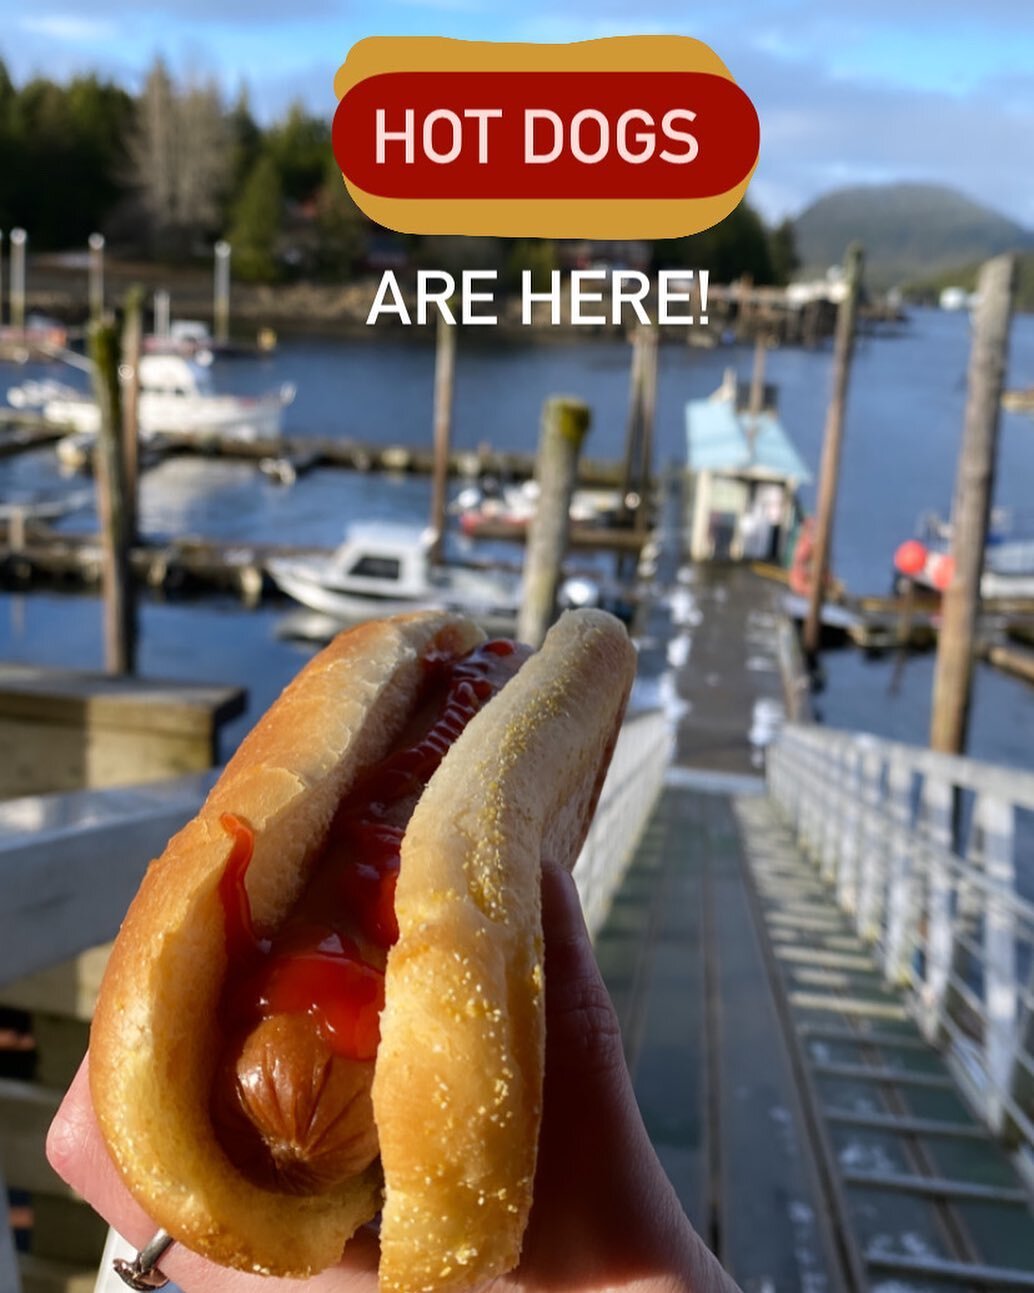 Hot dogs are back at Knudson Cove Marina!  Cheddar smoked sausages, toasty buns and all the ketchup and mustard you could want! Next time you are in grab a hot dog, bag of chips and a soda for just $5 🌭